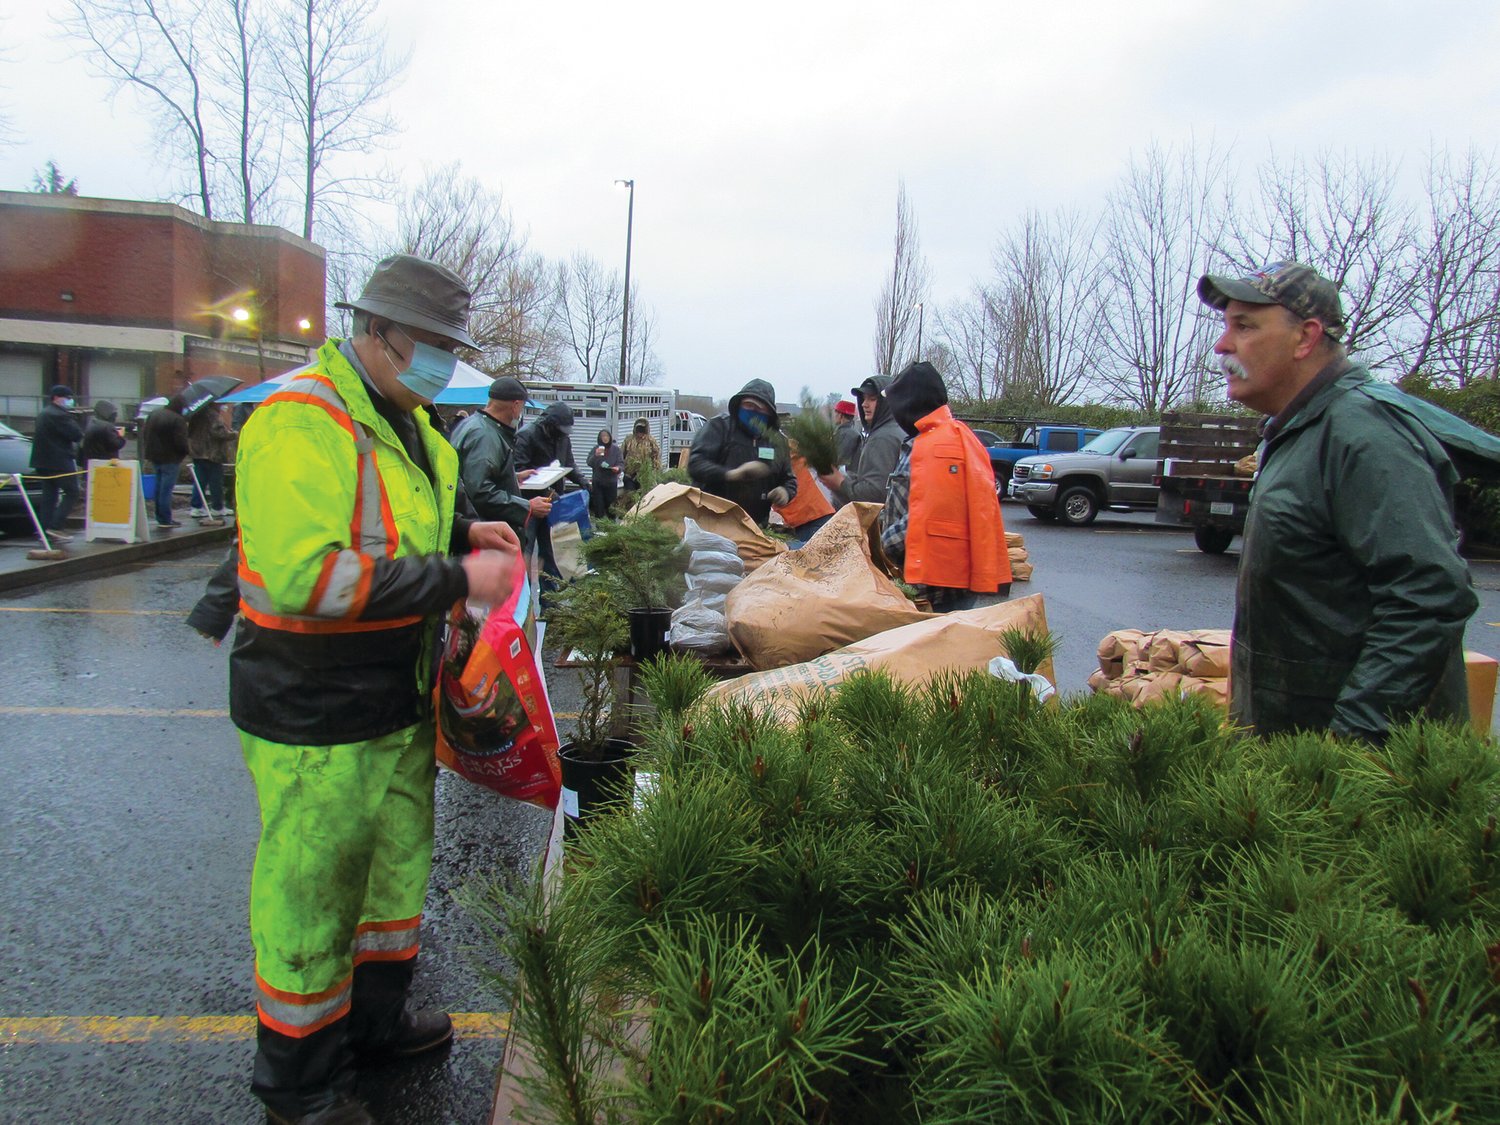 The popular tree seedling sale will take place again this year on Saturday, March 19 in the parking lot of Albertson’s in Battle Ground. Around 30 members of the Clark County Farm Forestry Association will be on hand to conduct the sale which benefits forestry projects.